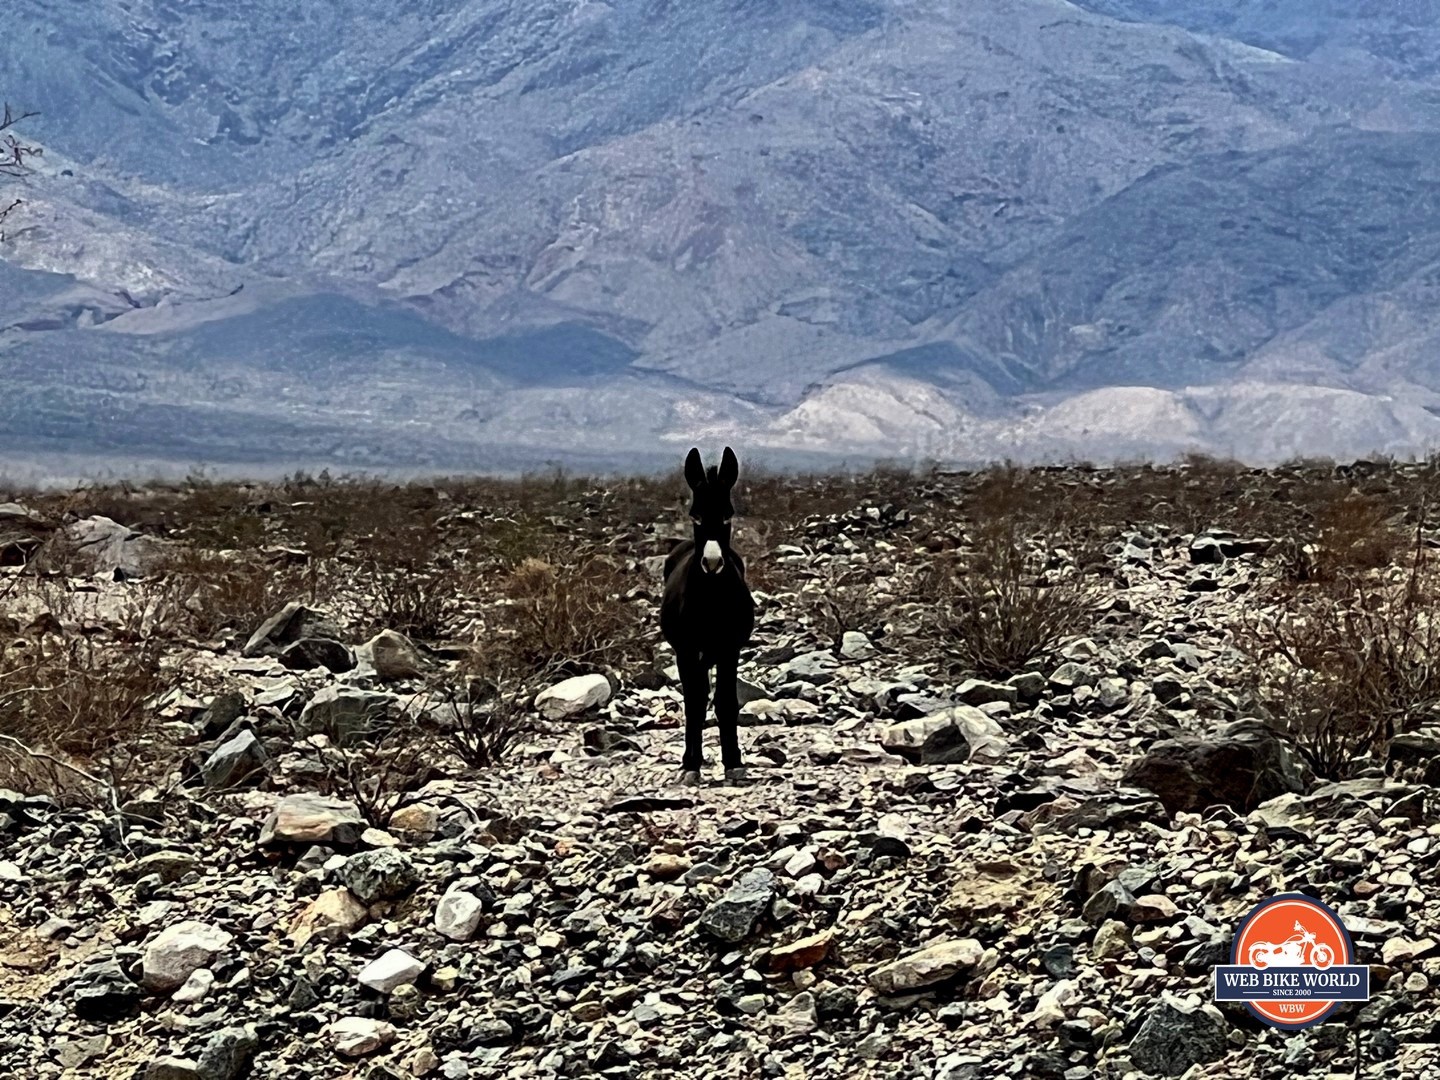 A wild donkey out in the desert.